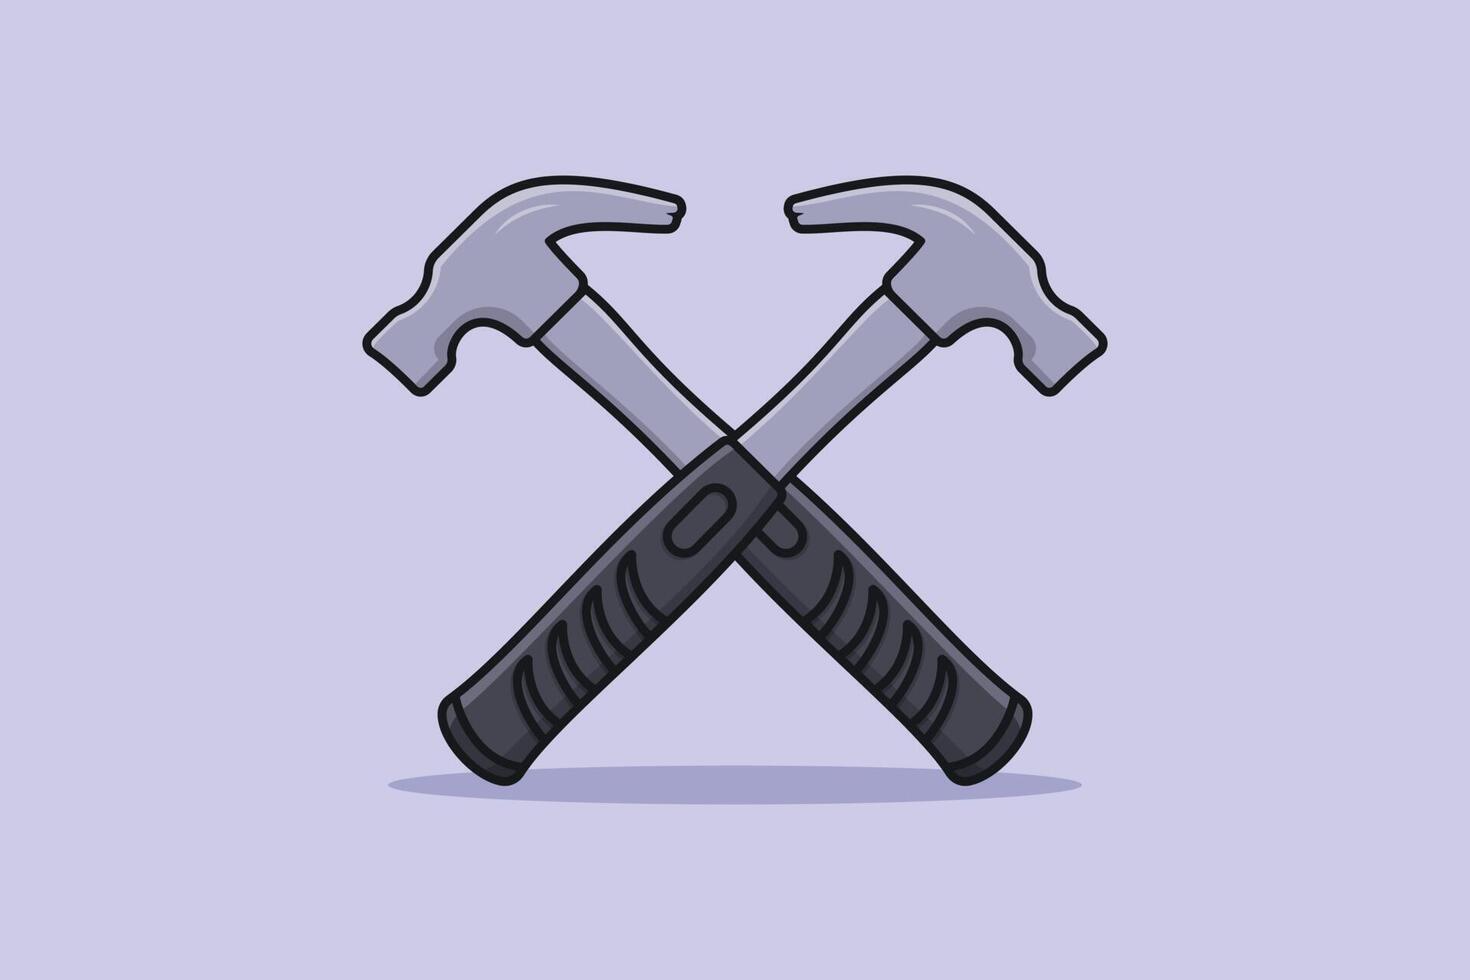 Claw Hammer tool vector illustration. Working tools equipment objects icon concept. Claw Hammer tool in cross sign vector design on purple background.